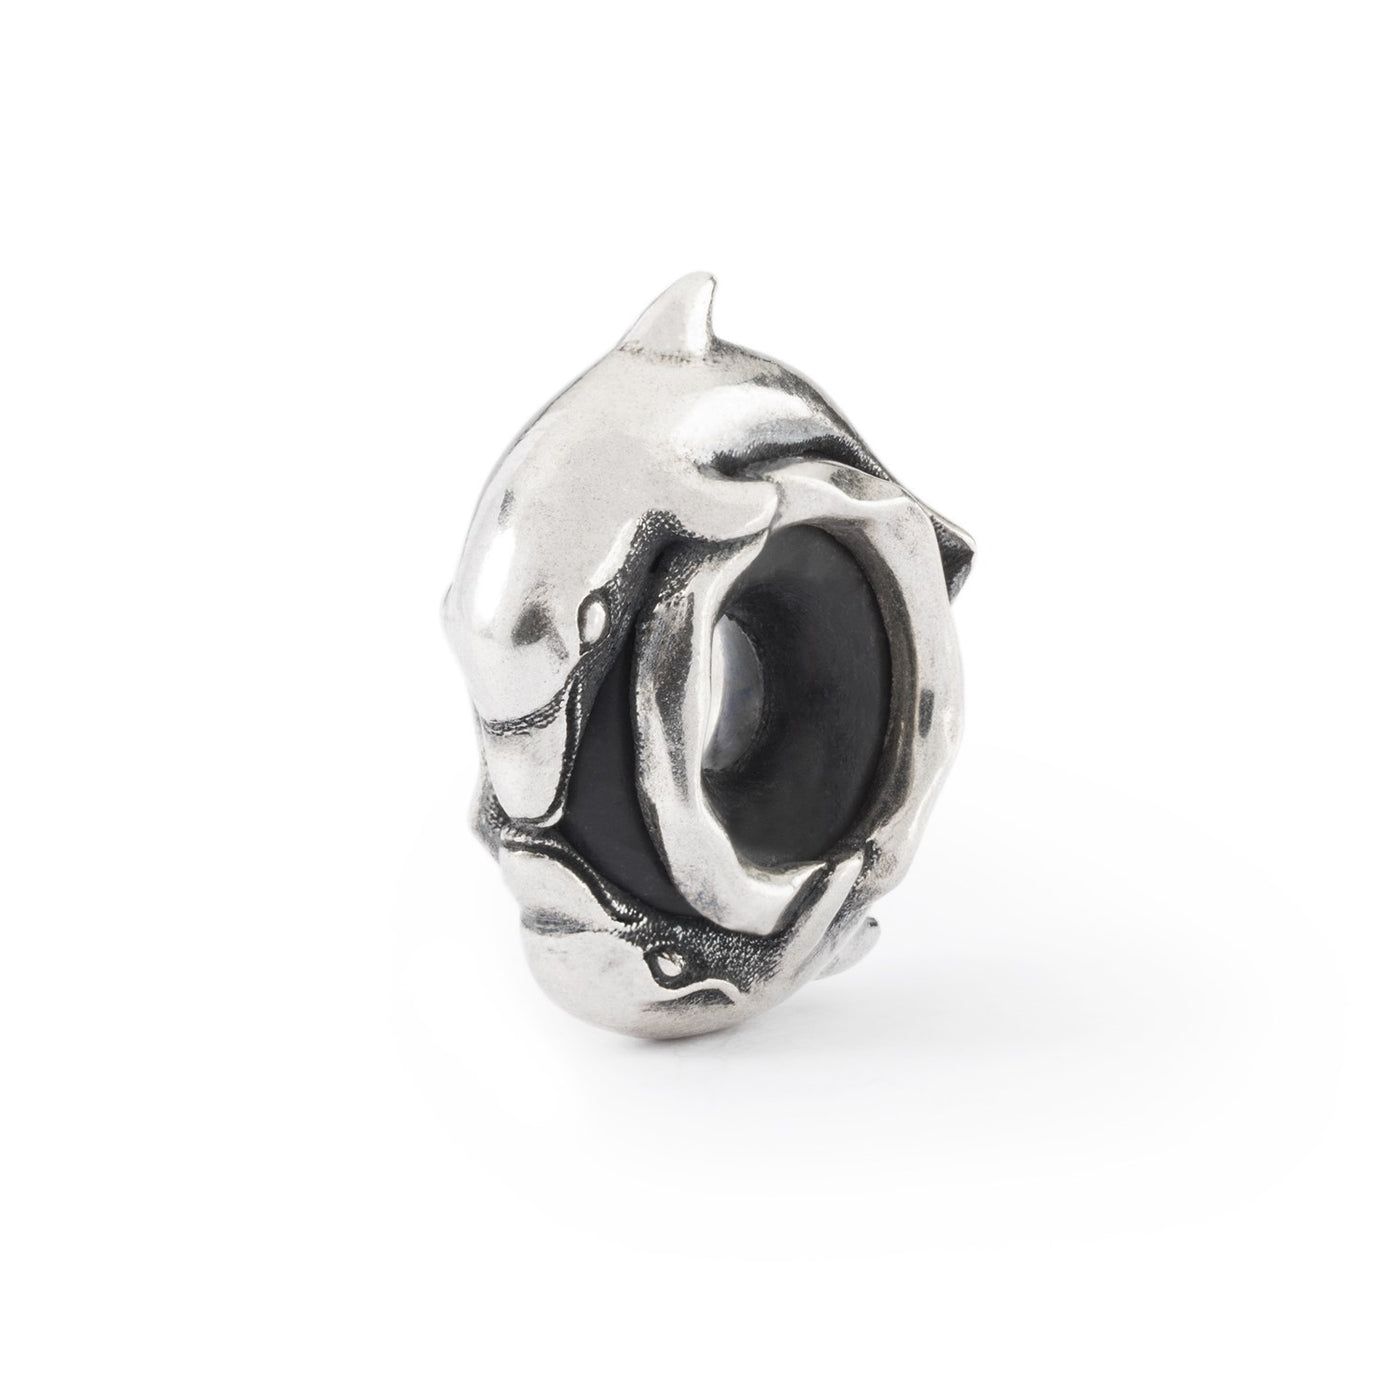 Two dolphins kiss on this silver jewellery bead